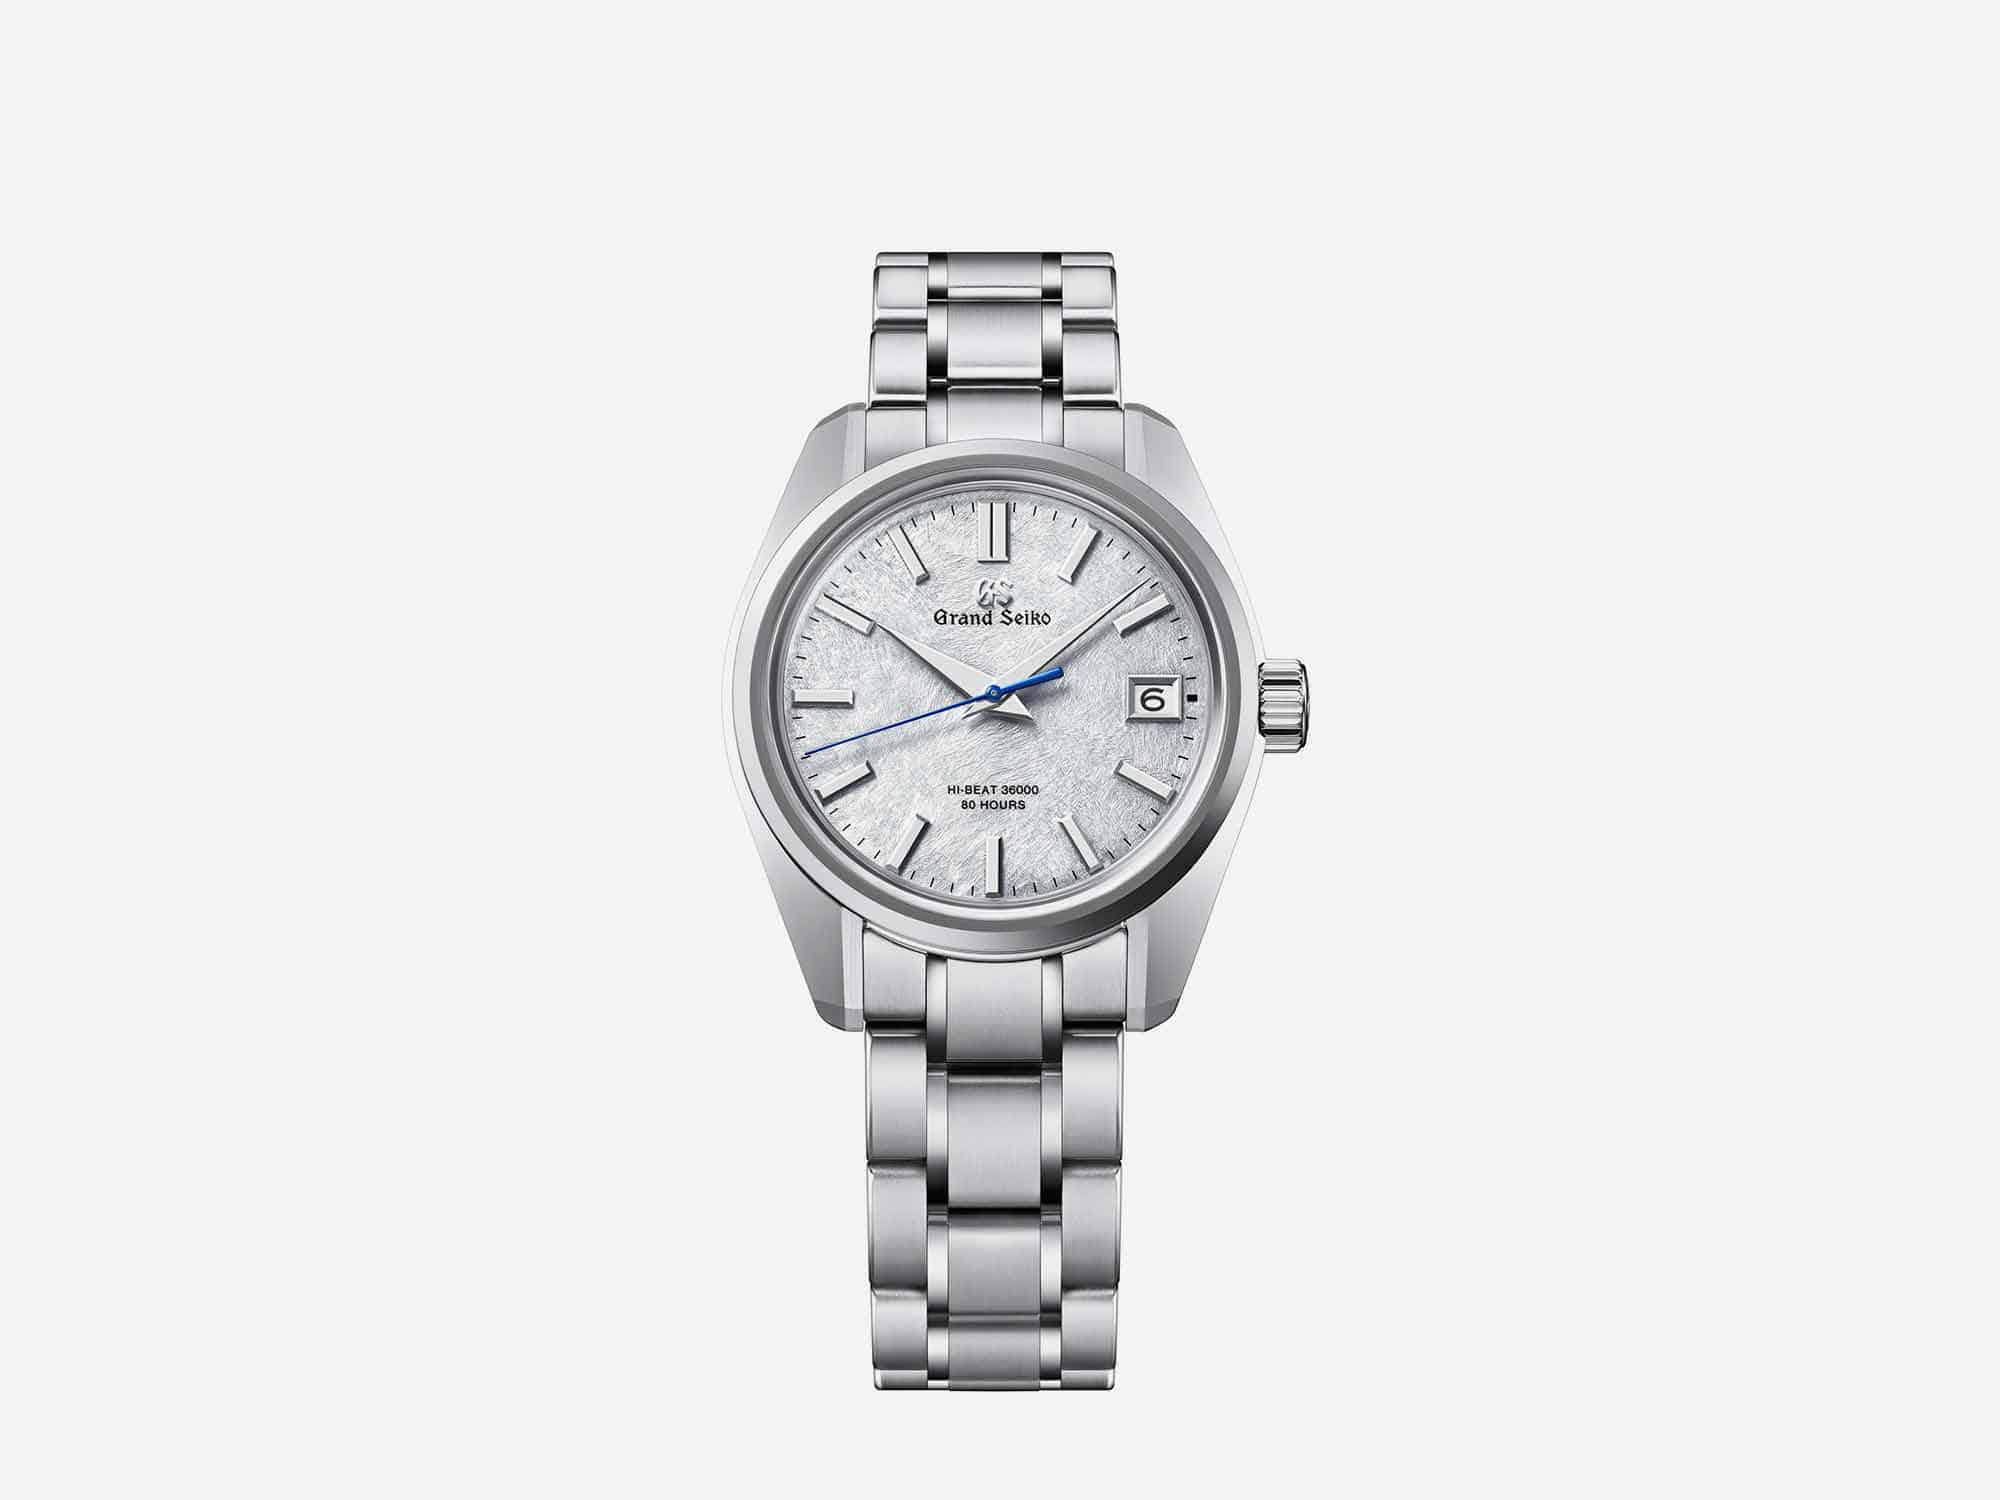 Grand Seiko Announces the SLGH013, Part of their 44GS Anniversary Celebration and Featuring an Ever-Brilliant Steel Case and Bracelet